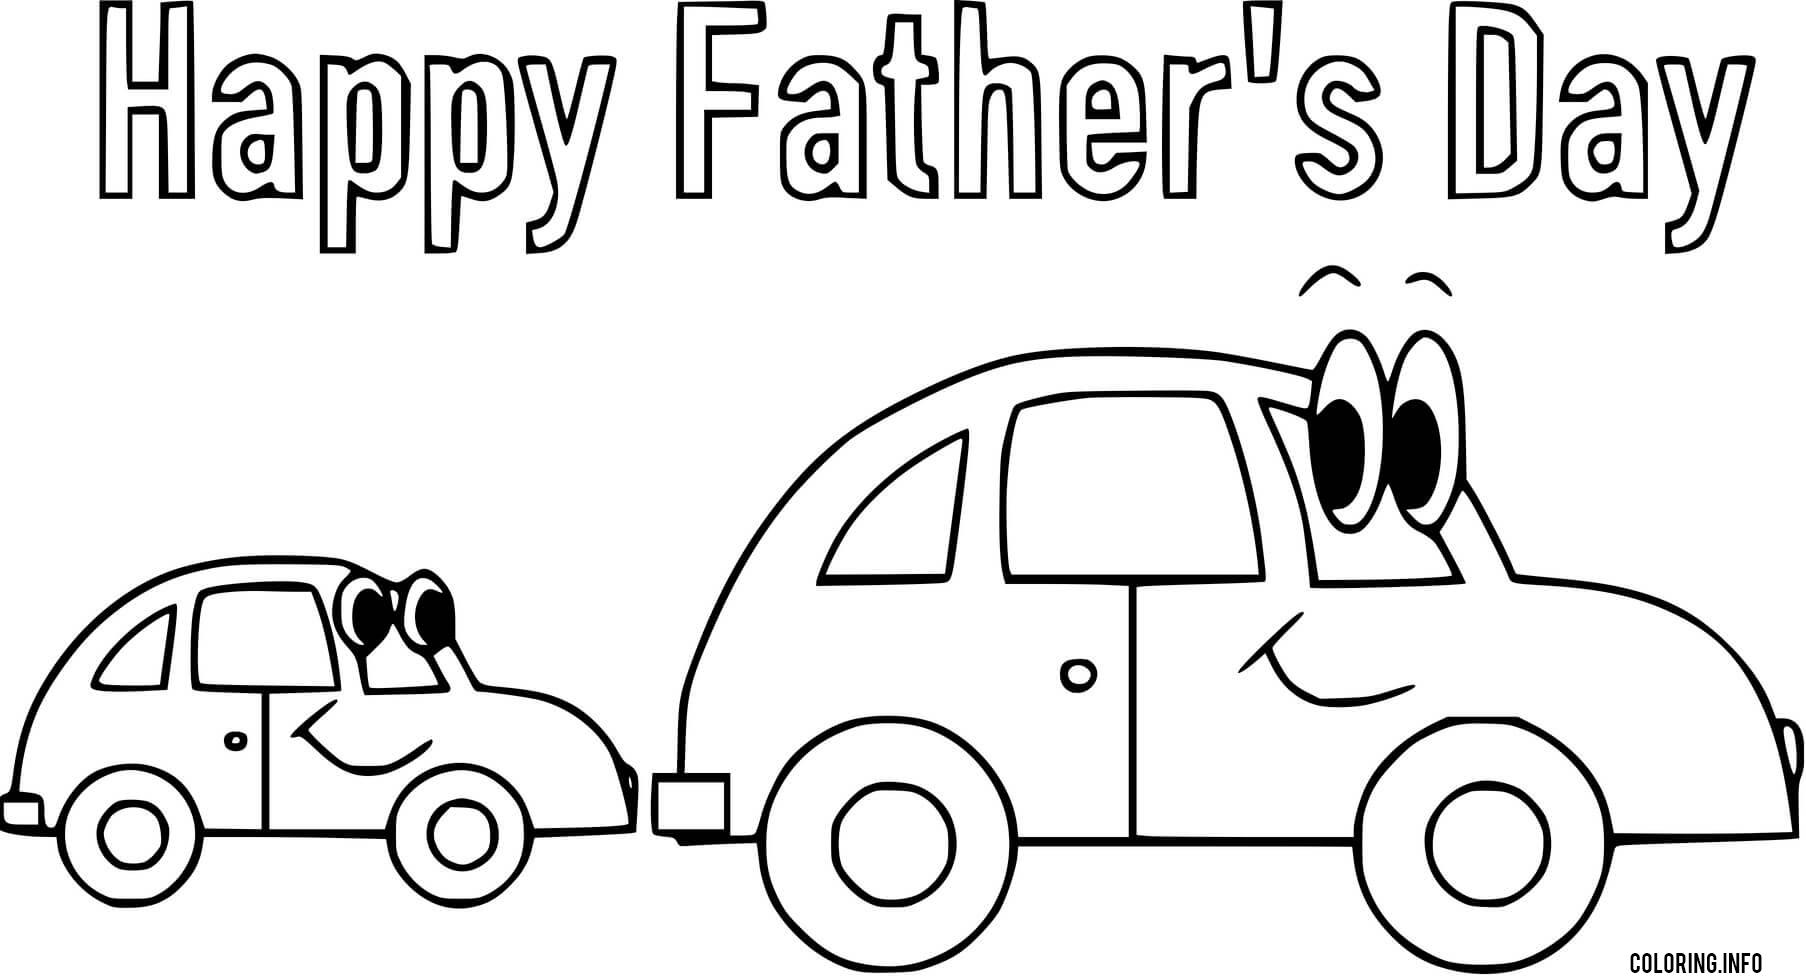 Happy Fathers Day And Two Cars coloring